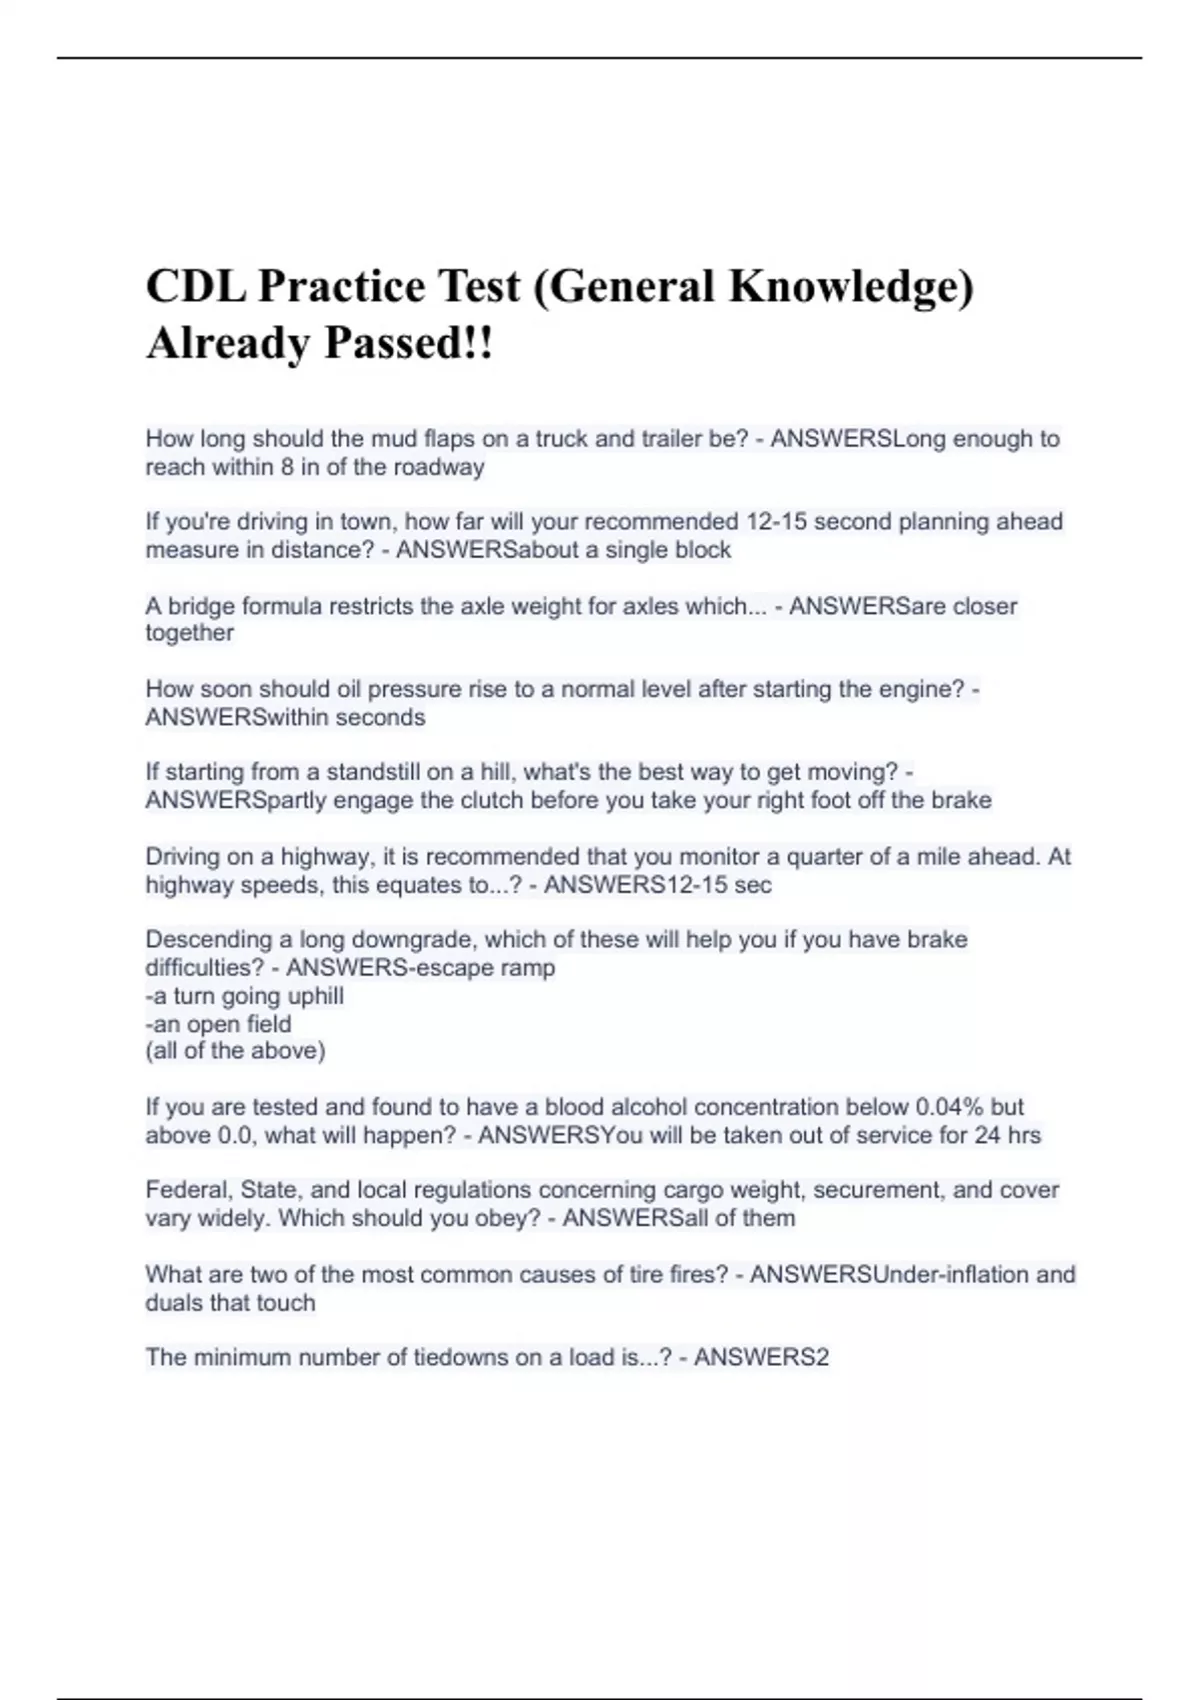 cdl-general-knowledge-practice-test-already-passed-full-pack-hot-sex